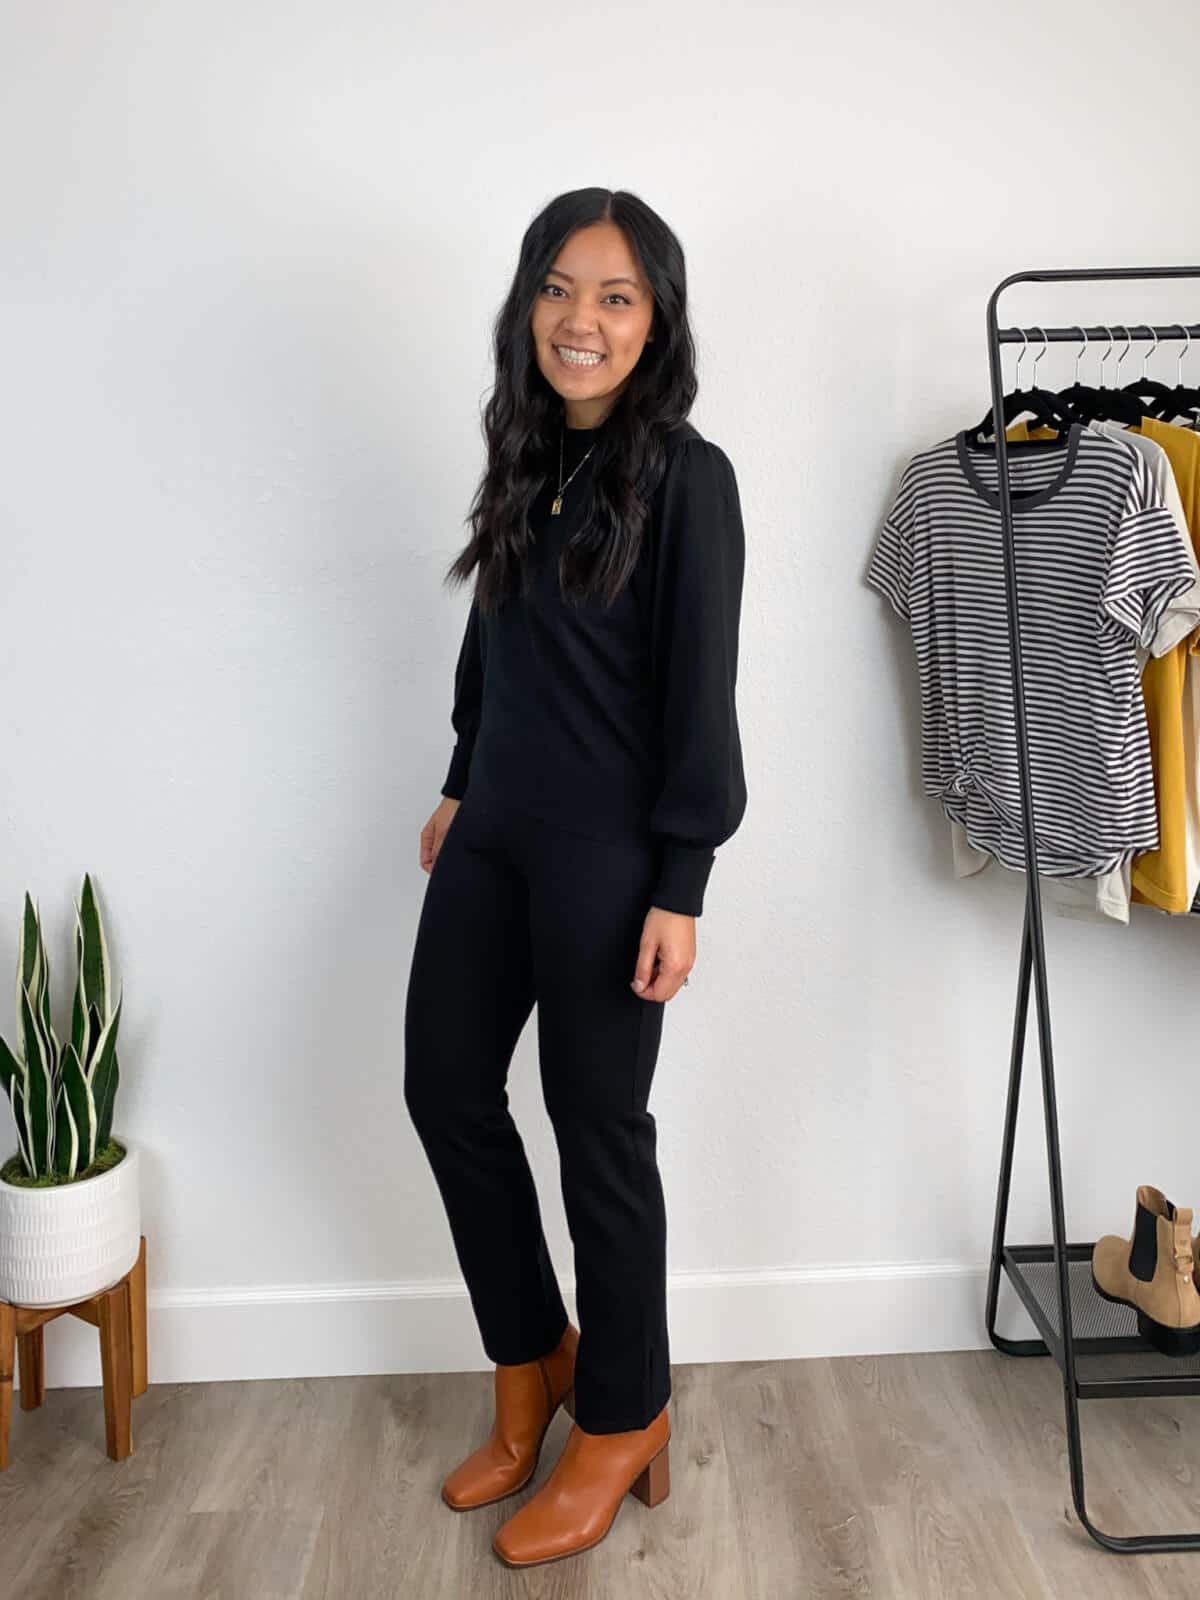 Work Pants with Boots Elevated Business Work Outfit: black puff sleeve sweater + black ankle length straight leg slacks + cognac heeled boots + gold pendant necklace side view